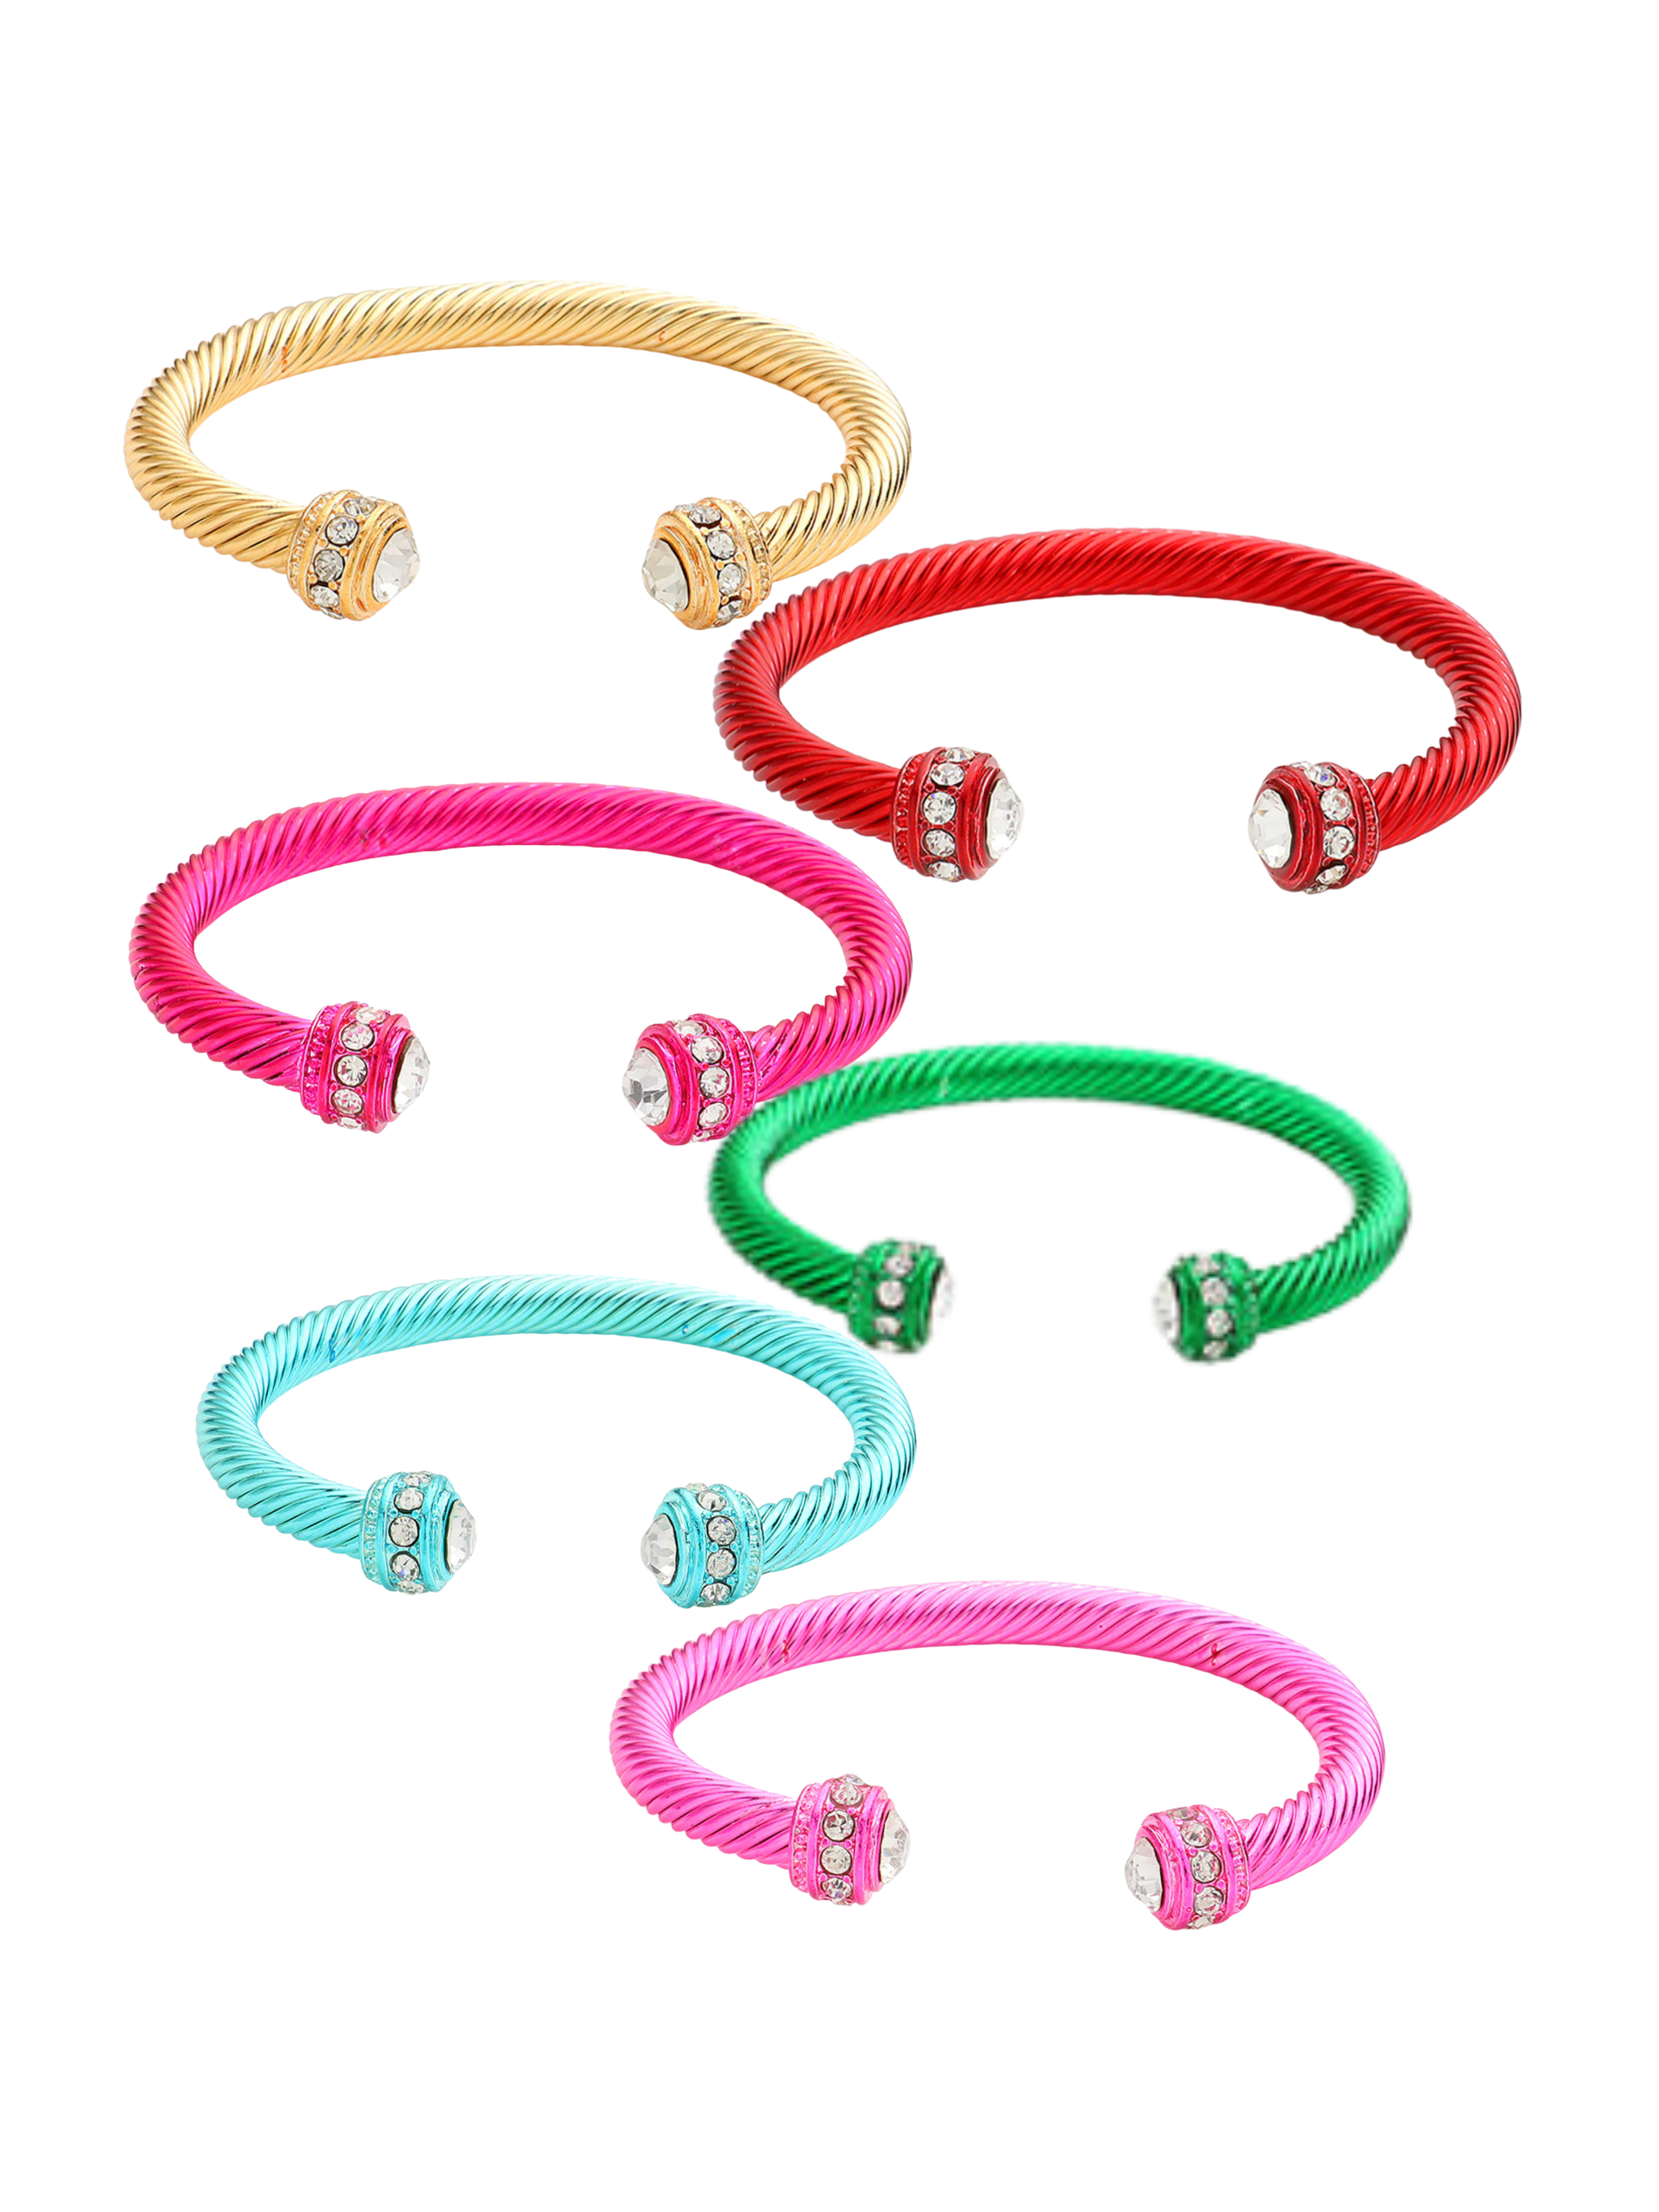 Colored Bling Cuffs